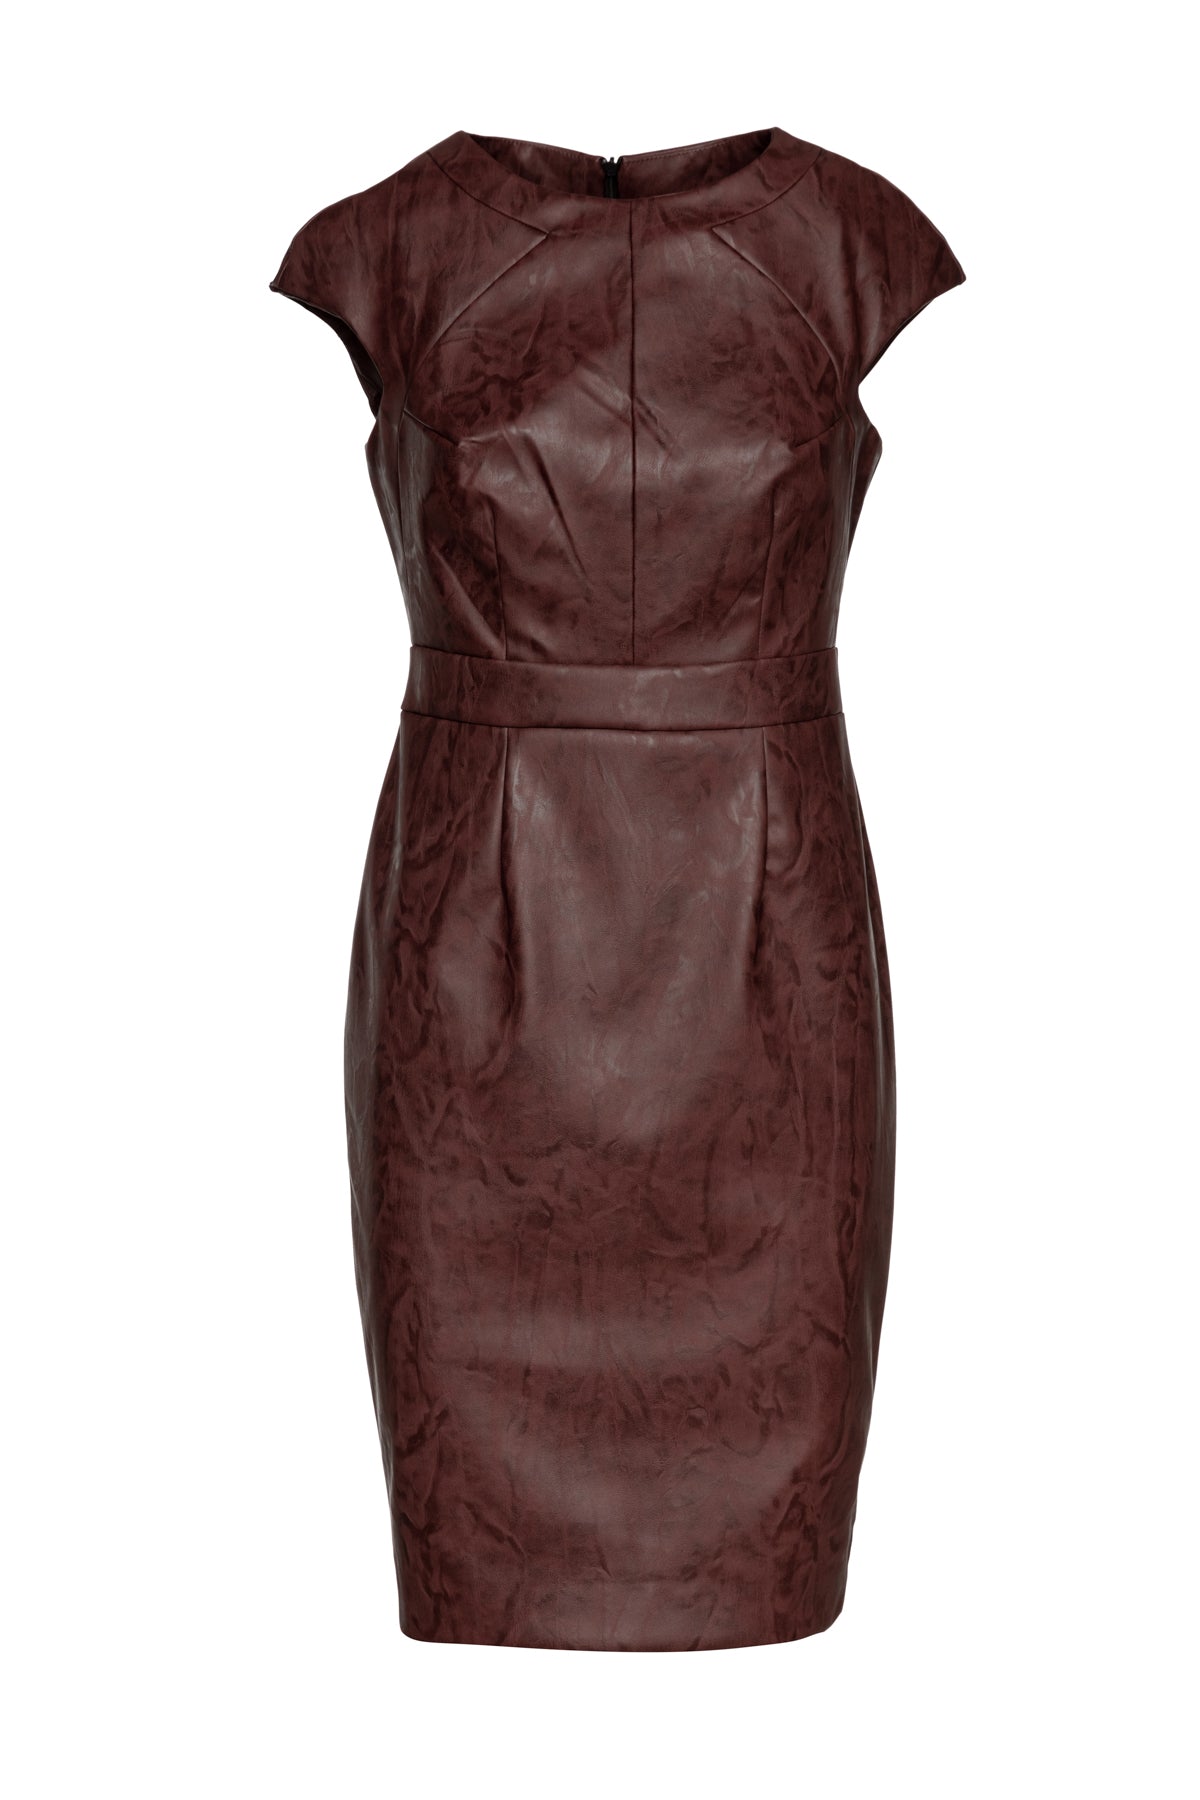 Women’s Chocolate Brown Faux Leather Dress Extra Small Conquista